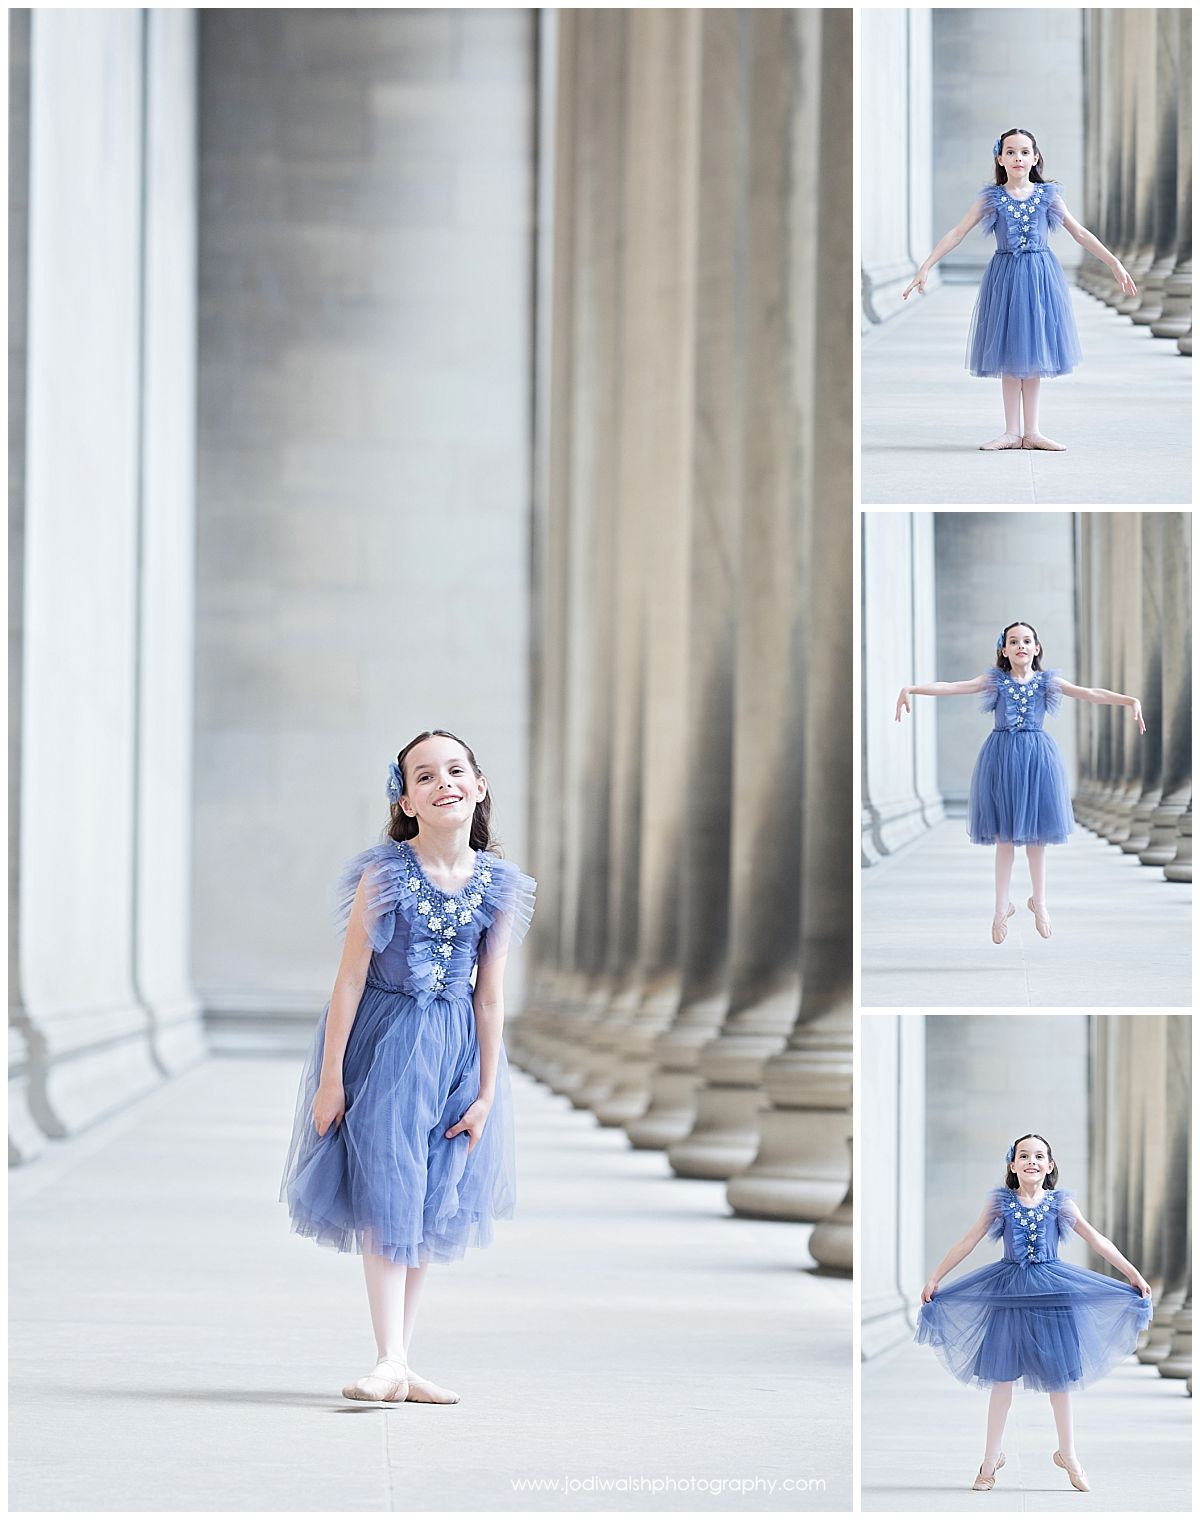 collage of images of a young dancer with dark hair, wearing a blue tulle dress, standing in a long hallway with stone columns